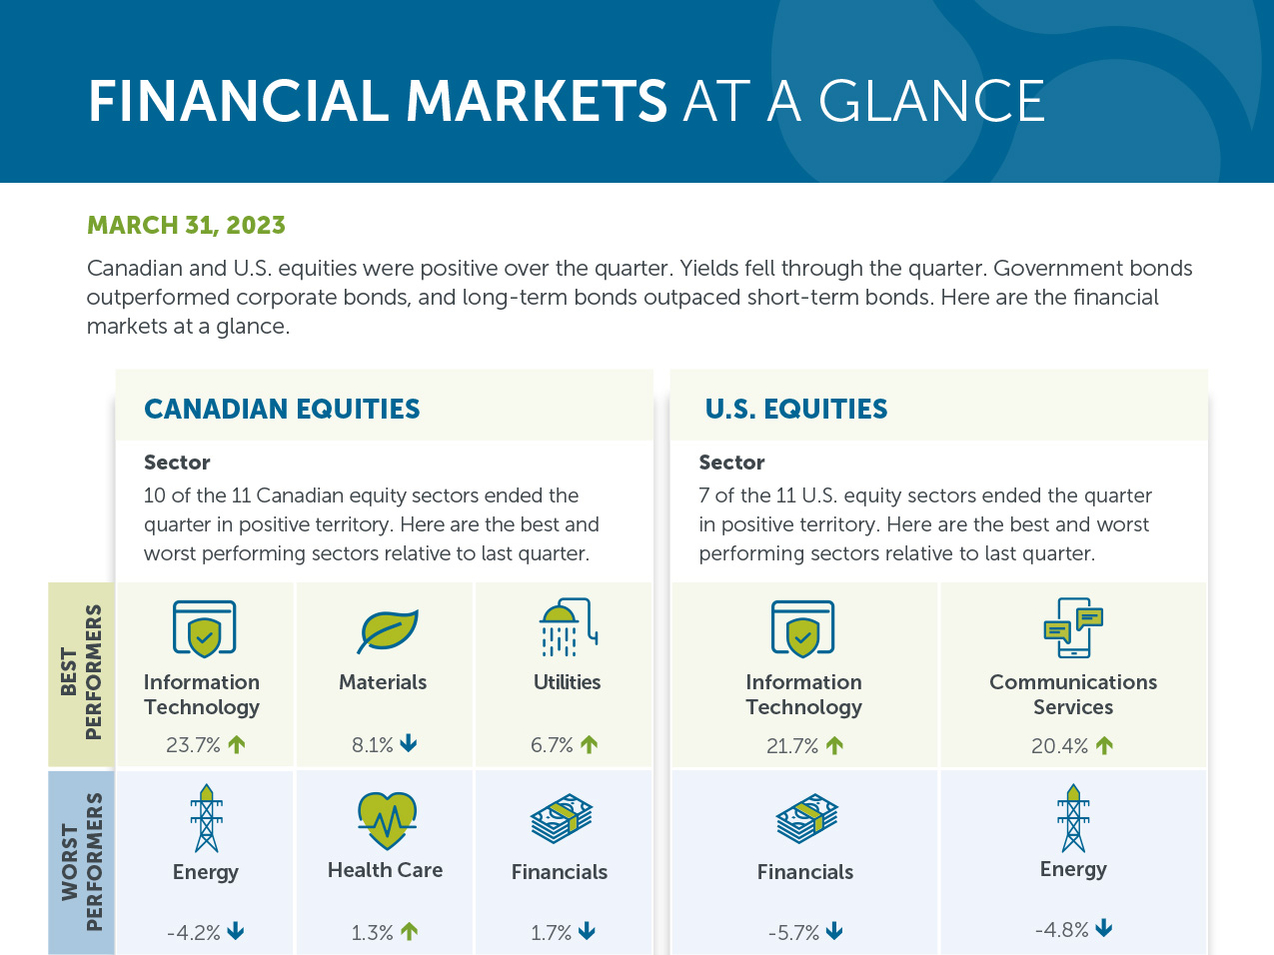 Financial markets at a glance - March 31, 2023